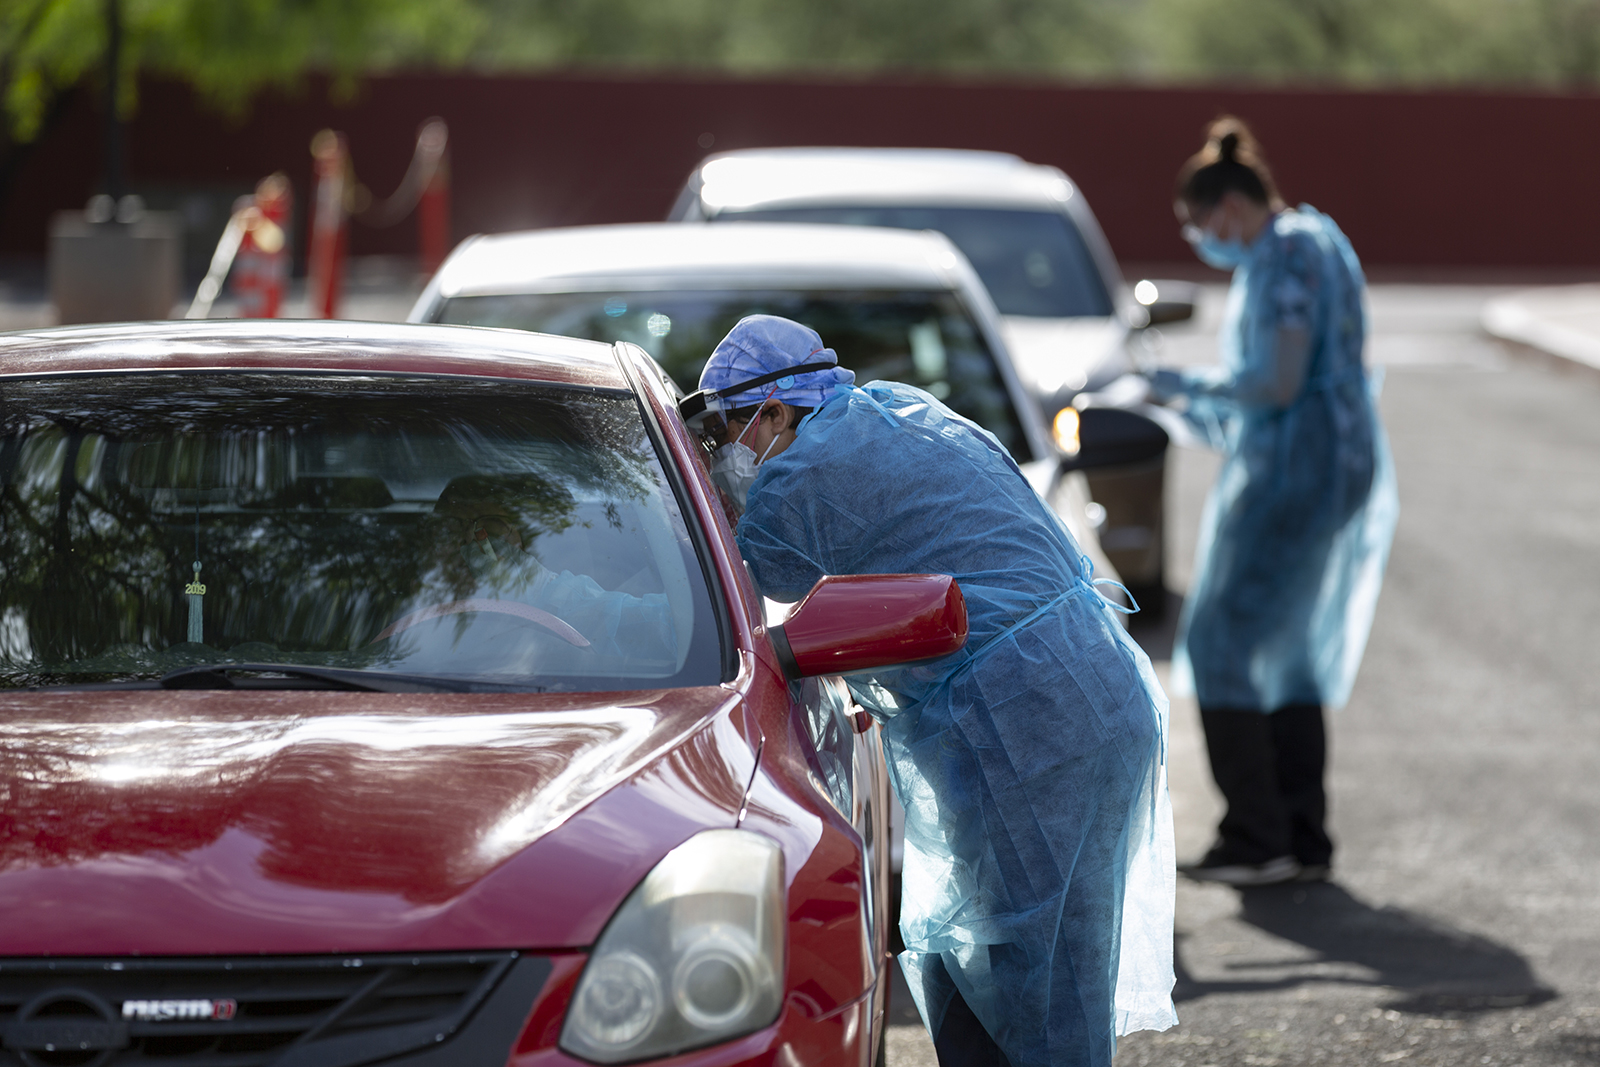 Healthcare workers wearing personal protective equipment (PPE) administer tests at a Covid-19 drive-thru testing site in Tucson, Arizona on July 13.